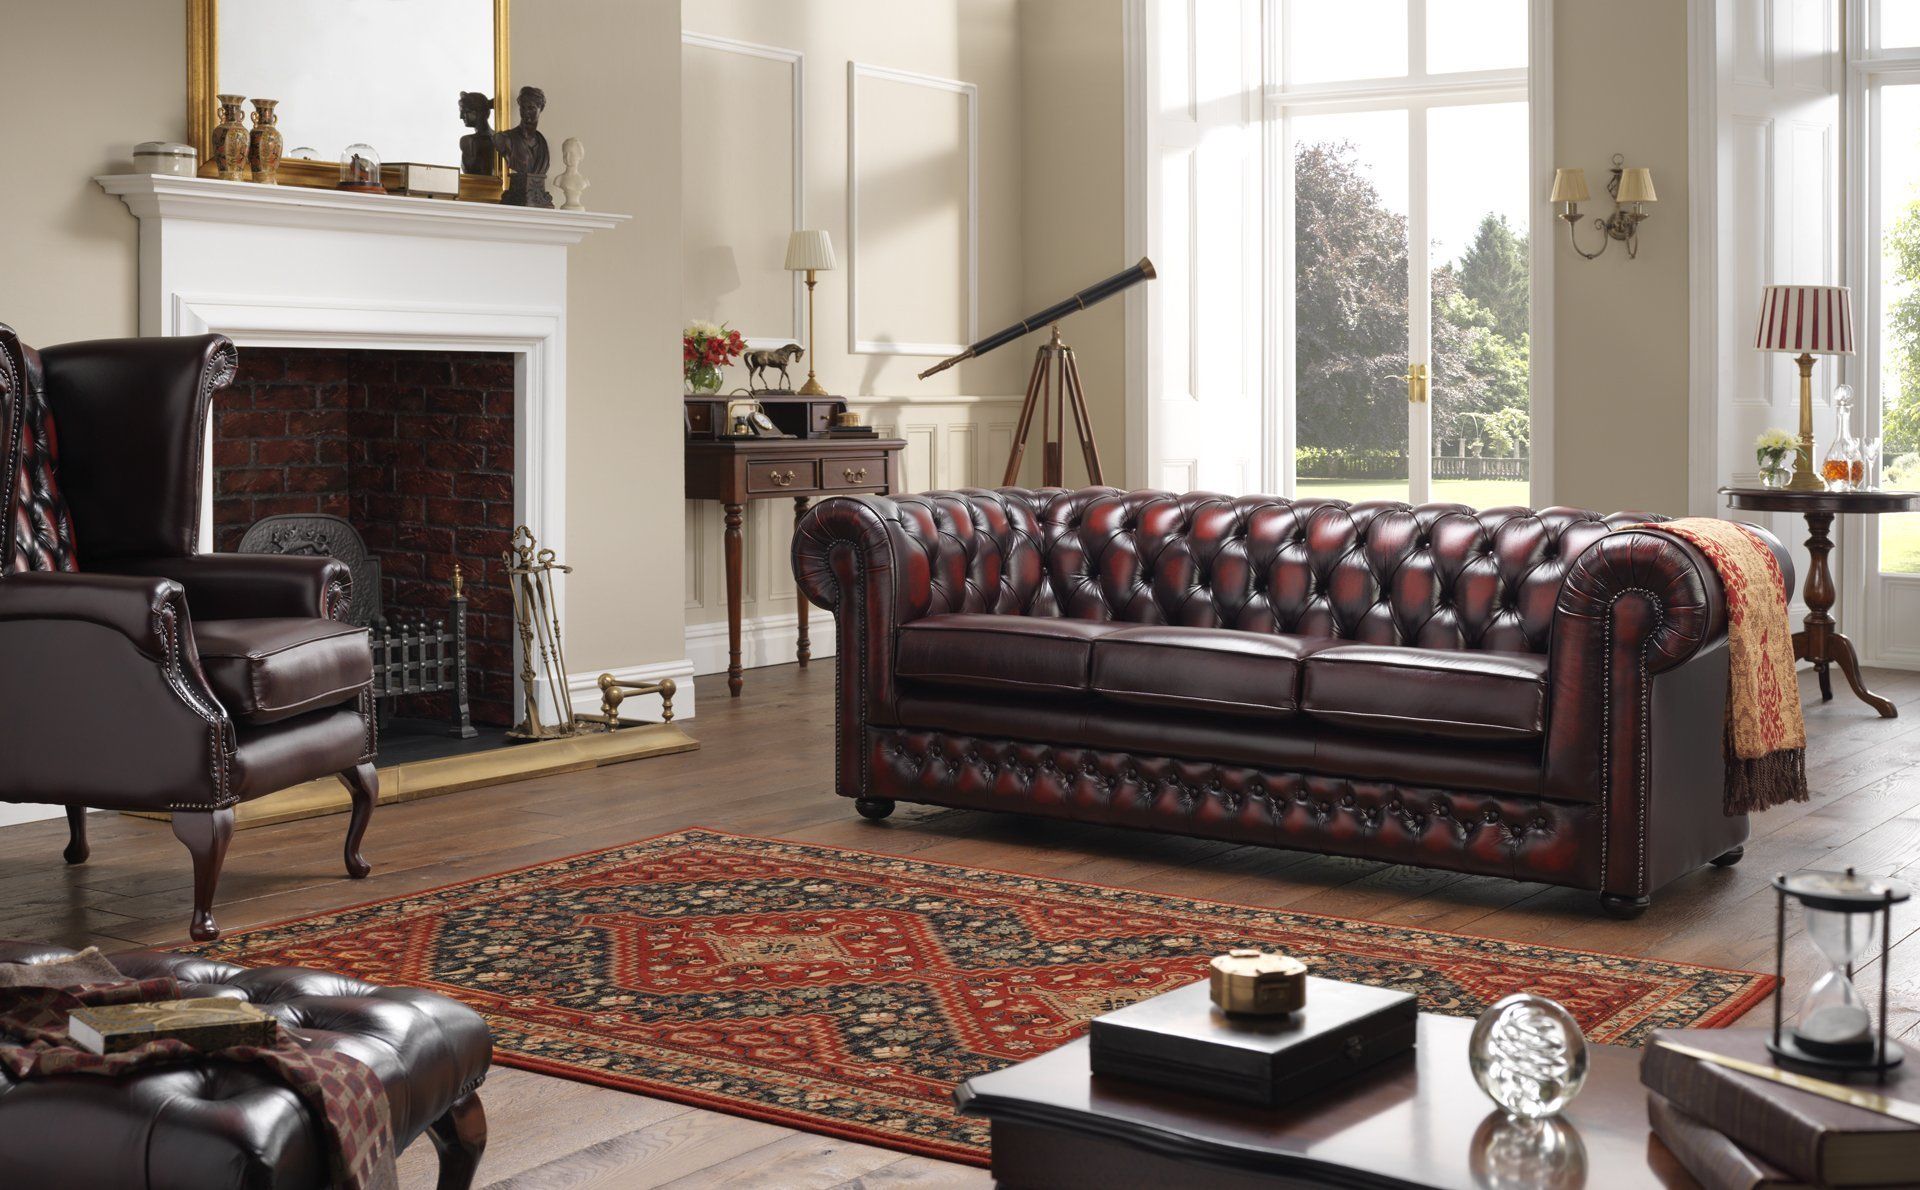 Chesterfield 3 Seater Leather Sofa In A Traditional Living Room Regarding Traditional 3 Seater Sofas (View 8 of 20)